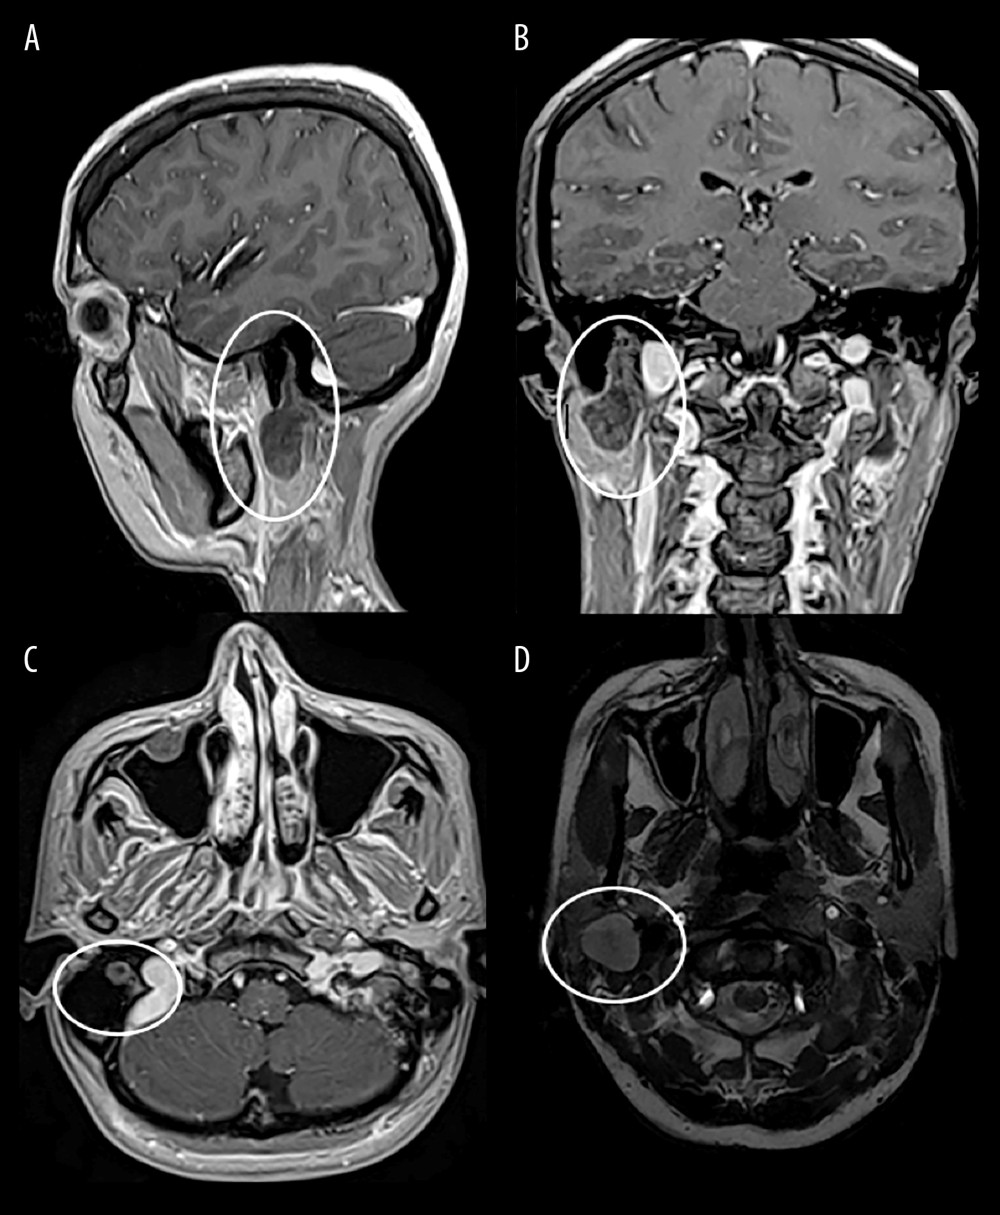 Magnetic resonance imaging scan of the head. (D) T2-weighted moderate hyperintense, homogenous lesion with (A–C) only minor peripheral and part central contrast enhancement. (A–D) The lesions again extend into the widened mastoid segment of the right facial canal and present with a mass in the extratemporal segment. (A–C) T1-weighted contrast-enhanced magnetization prepared-rapid gradient echo (MP-RAGE) sequence in 3-dimensional reconstruction (sagittal, coronal, axial). (D) High-resolution T2-weighted constructive interference in steady state (CISS) sequence in axial view without contrast enhancement.